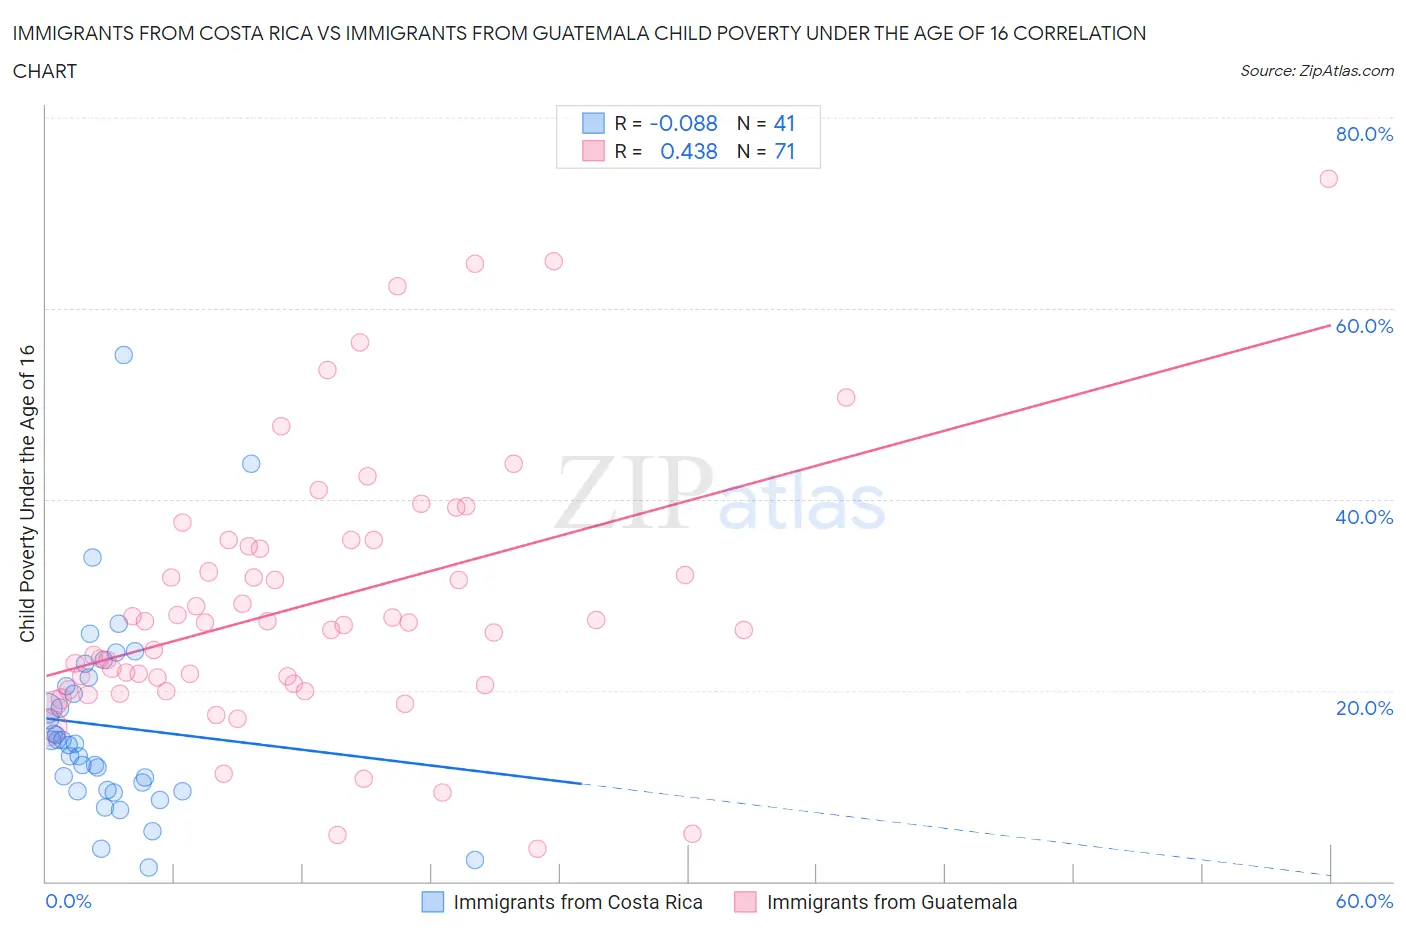 Immigrants from Costa Rica vs Immigrants from Guatemala Child Poverty Under the Age of 16